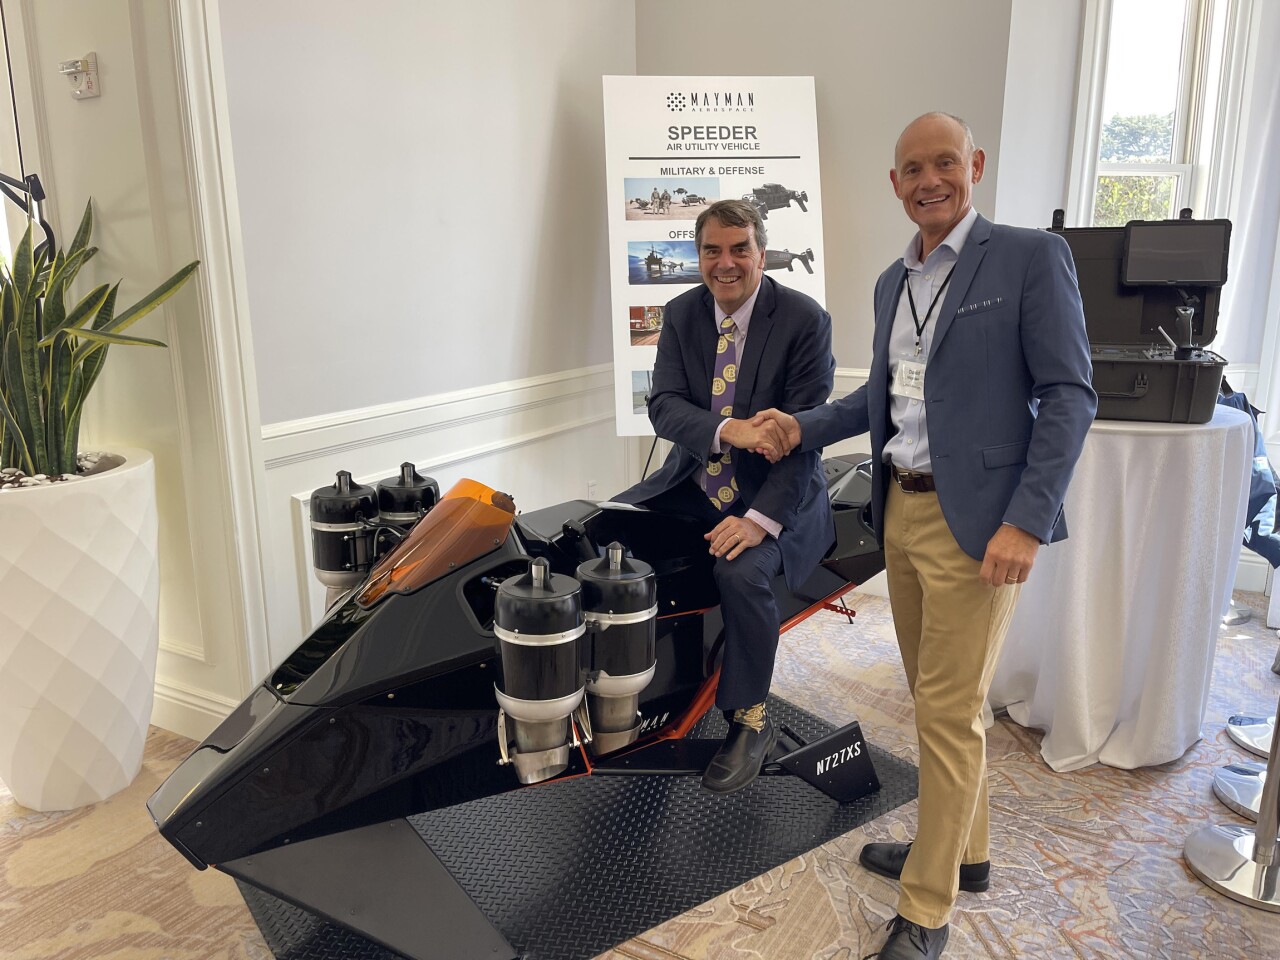 Tim Draper (seated) and Mayman Aerospace CEO David Mayman at the debut of the Speeder prototype